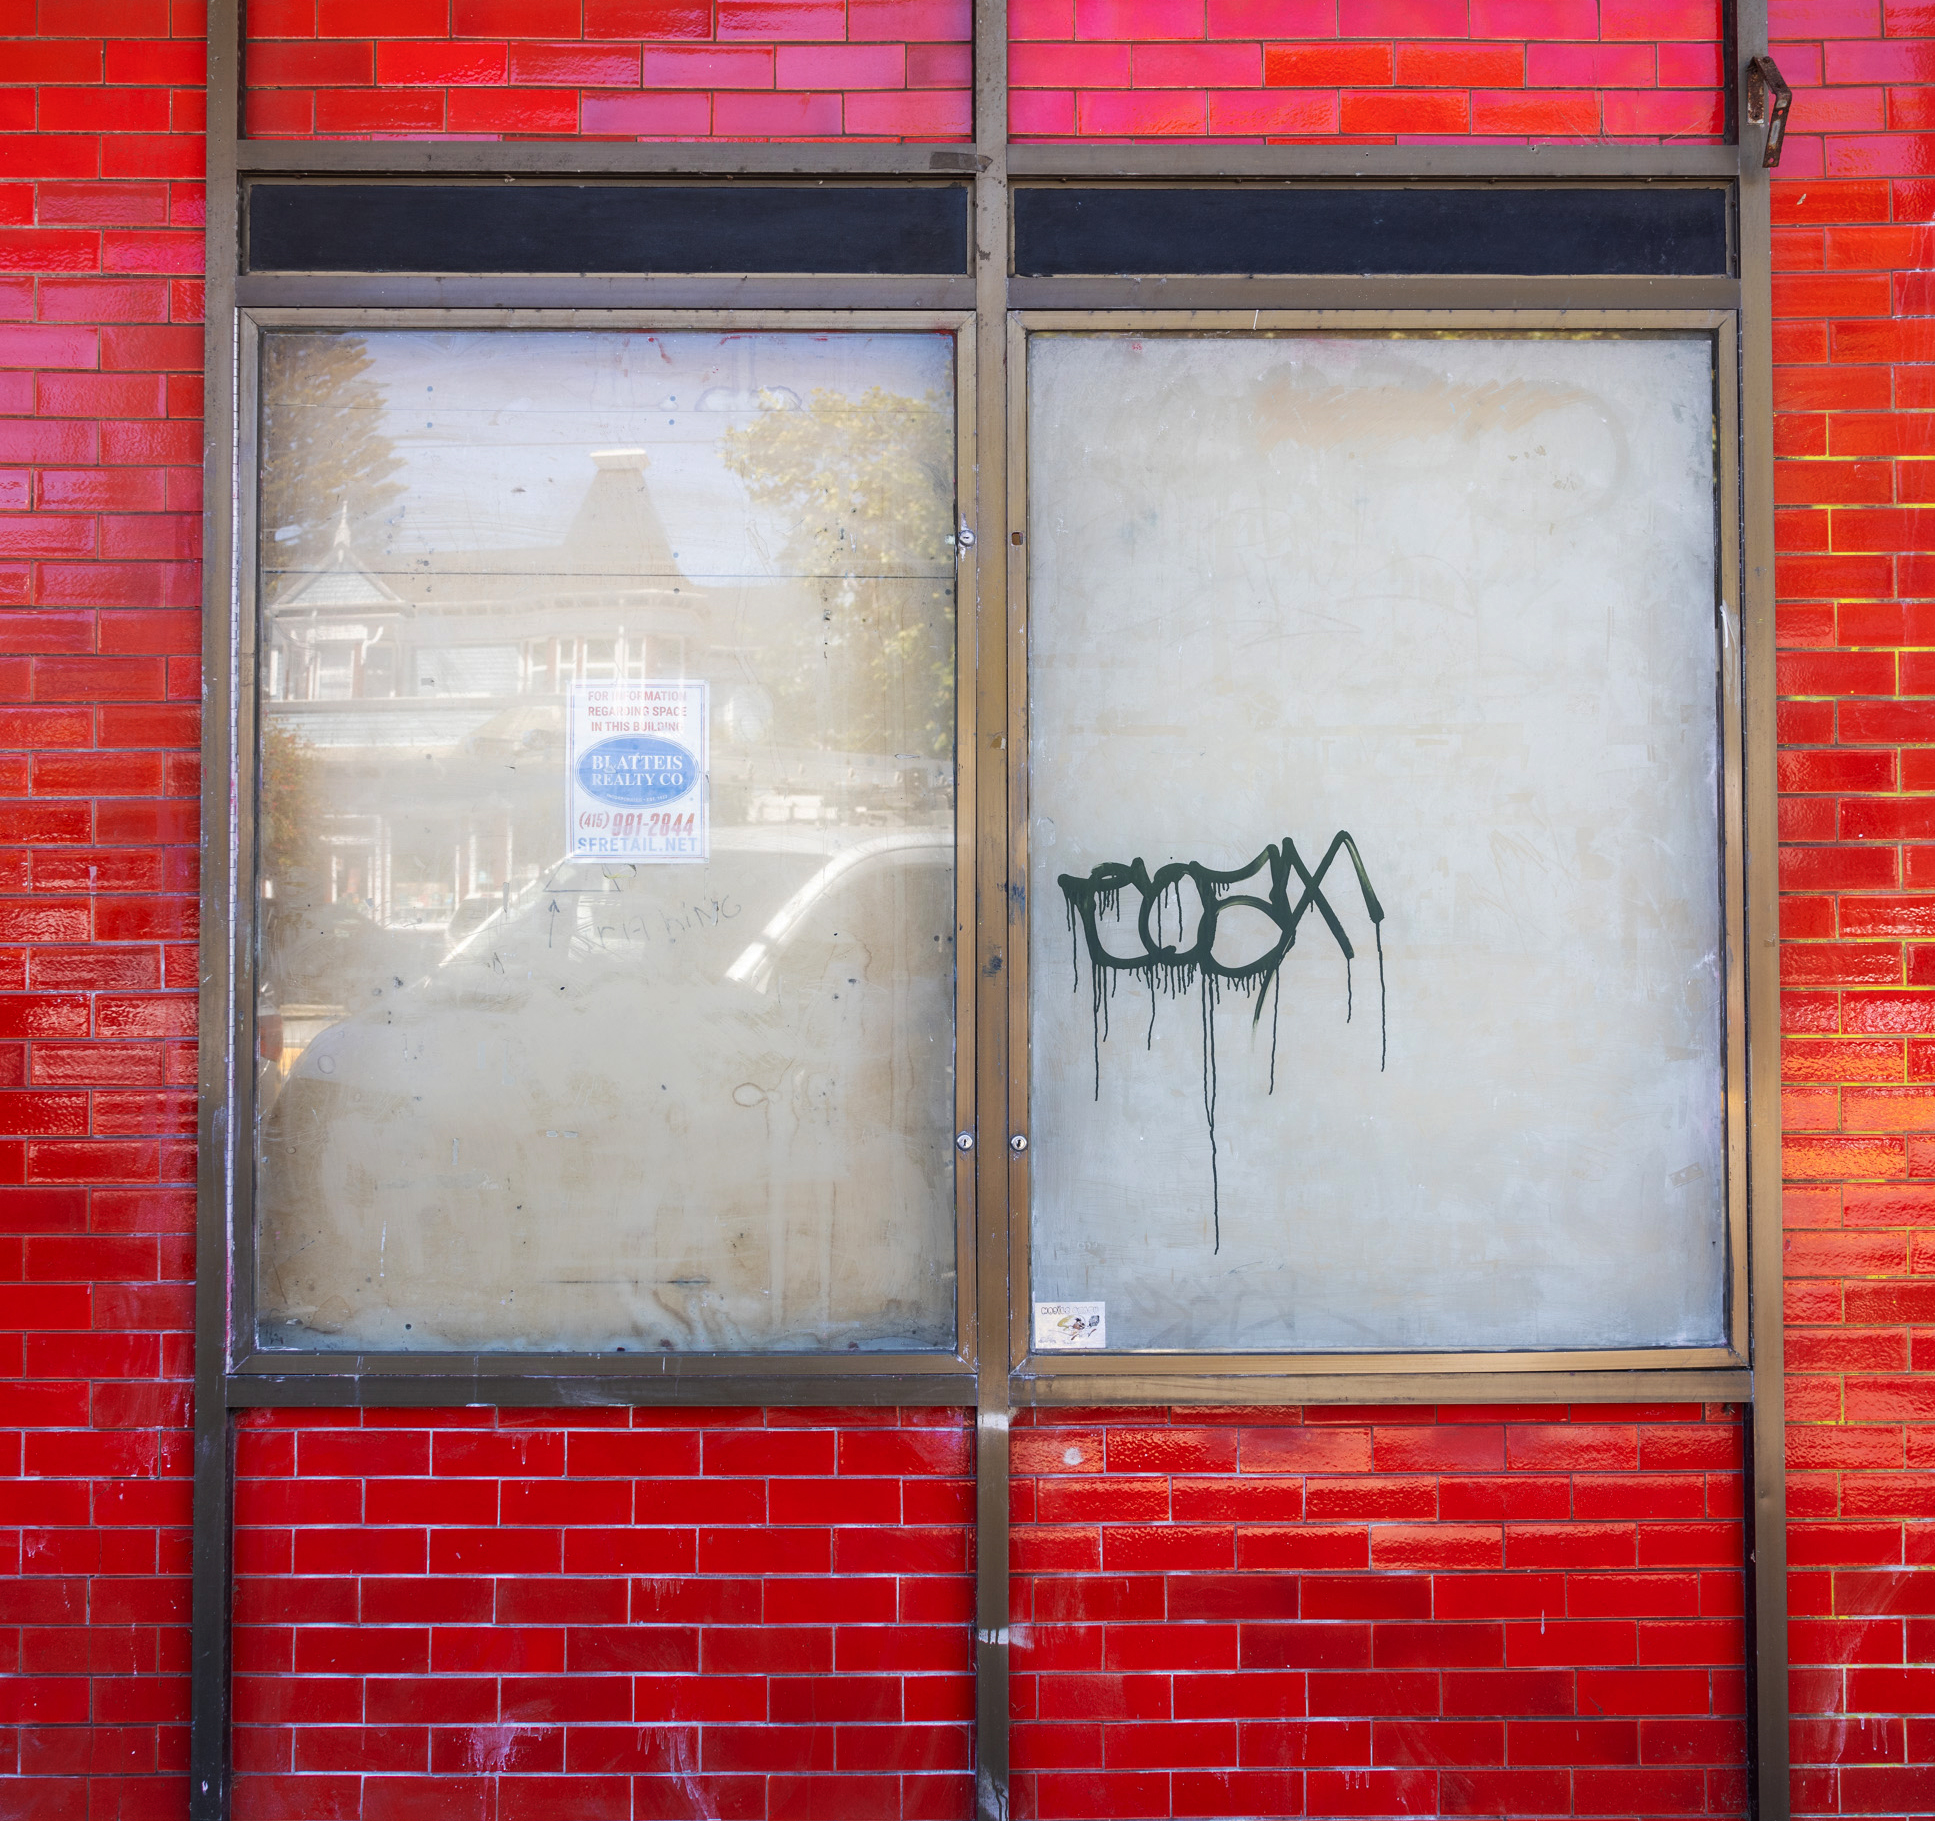 The image shows a red brick wall with two large windows. One window has a &quot;for sale&quot; sign and the other has black graffiti. The reflections show building facades.